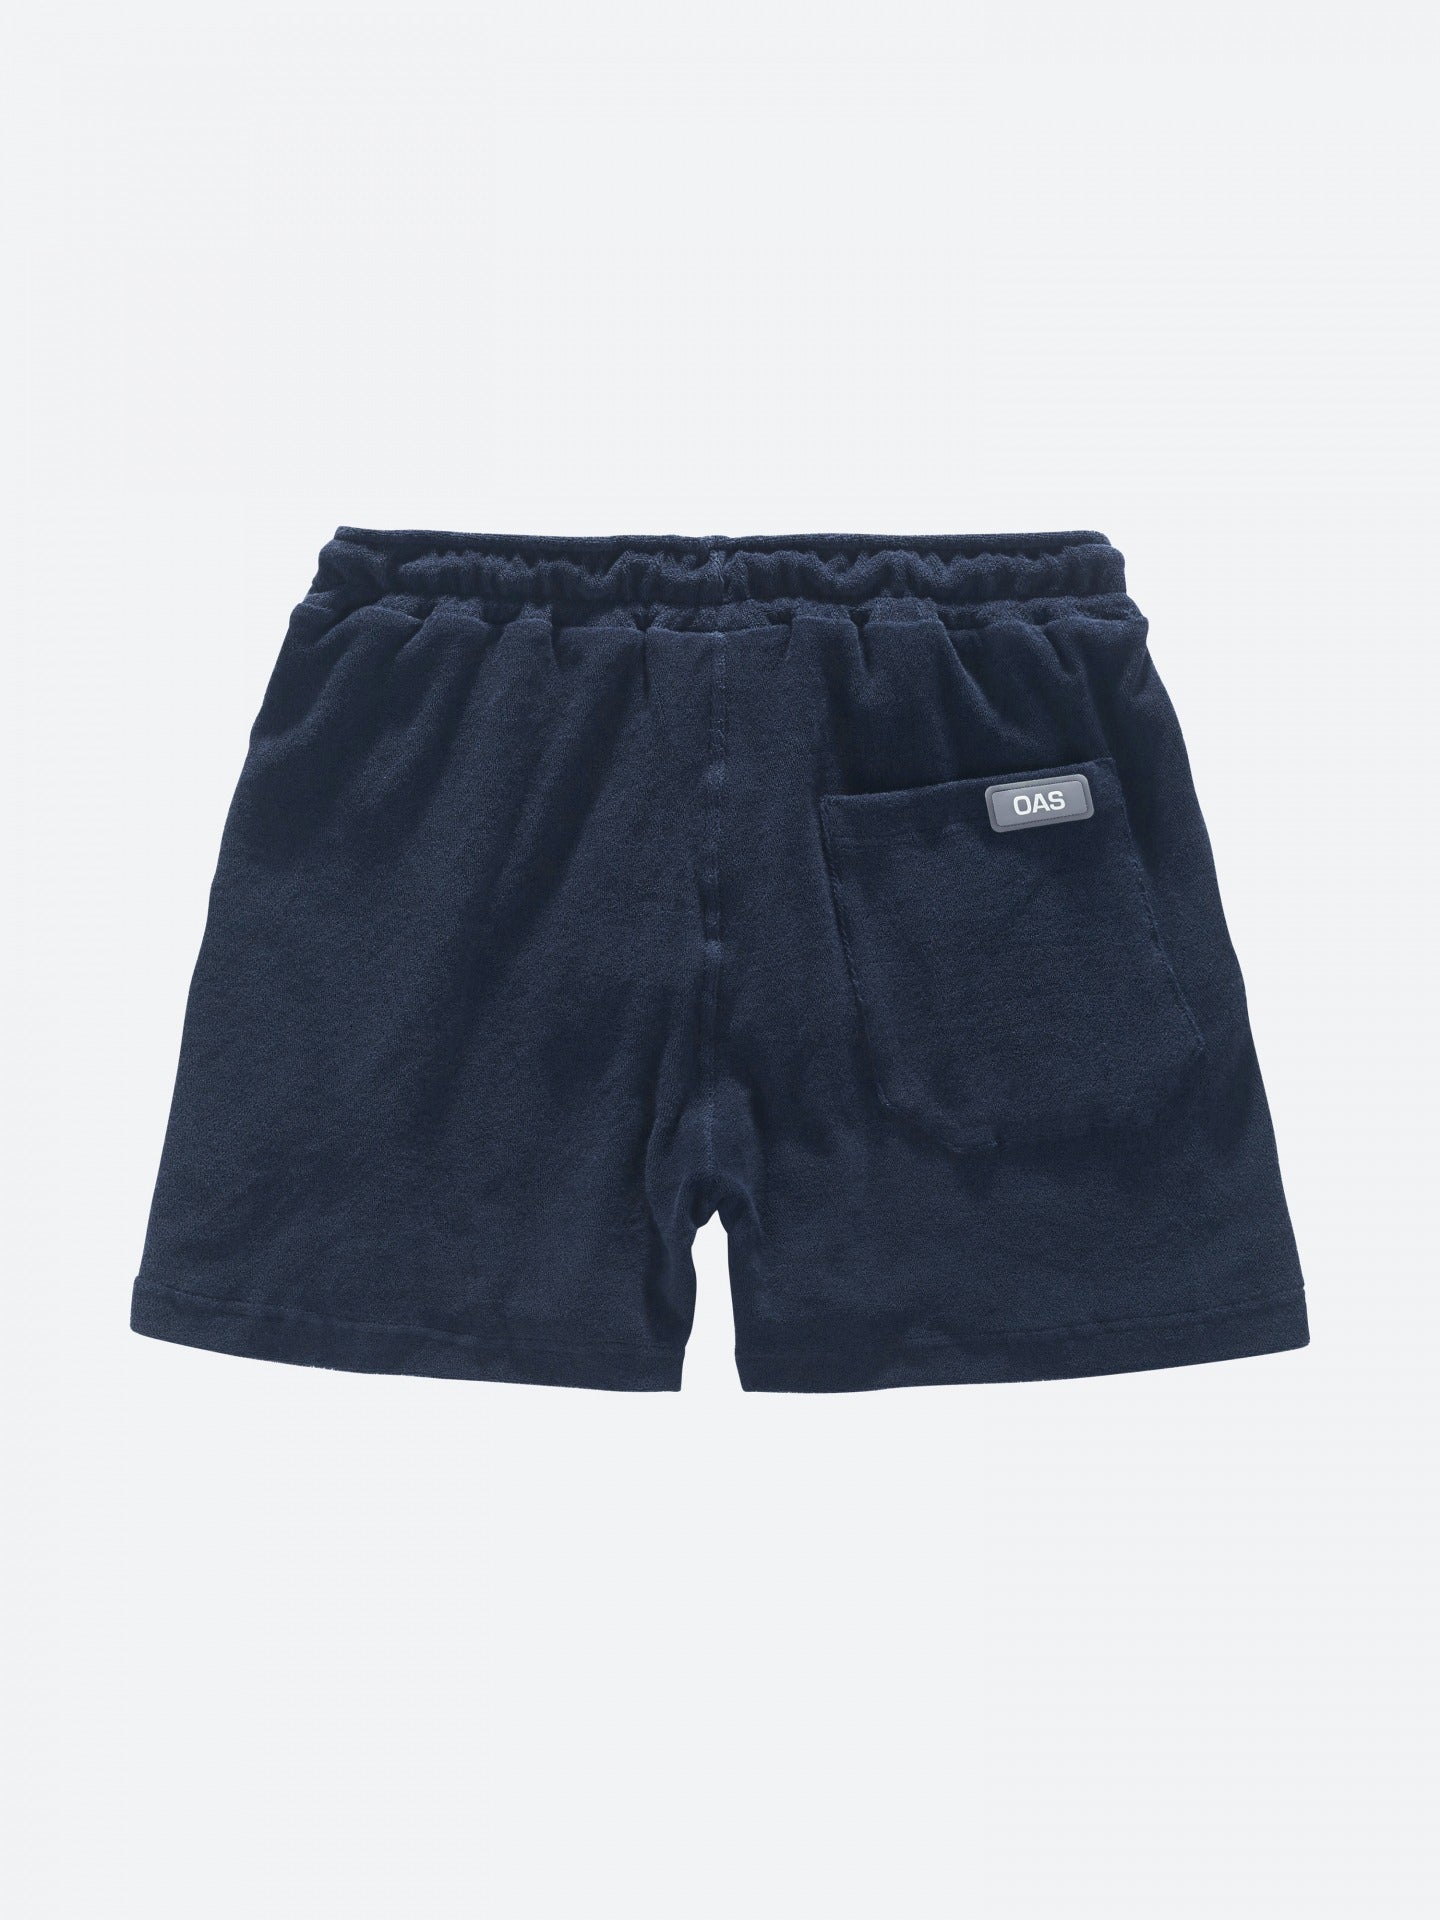 Oas Navy Terry Shorts - Mojo Independent Store